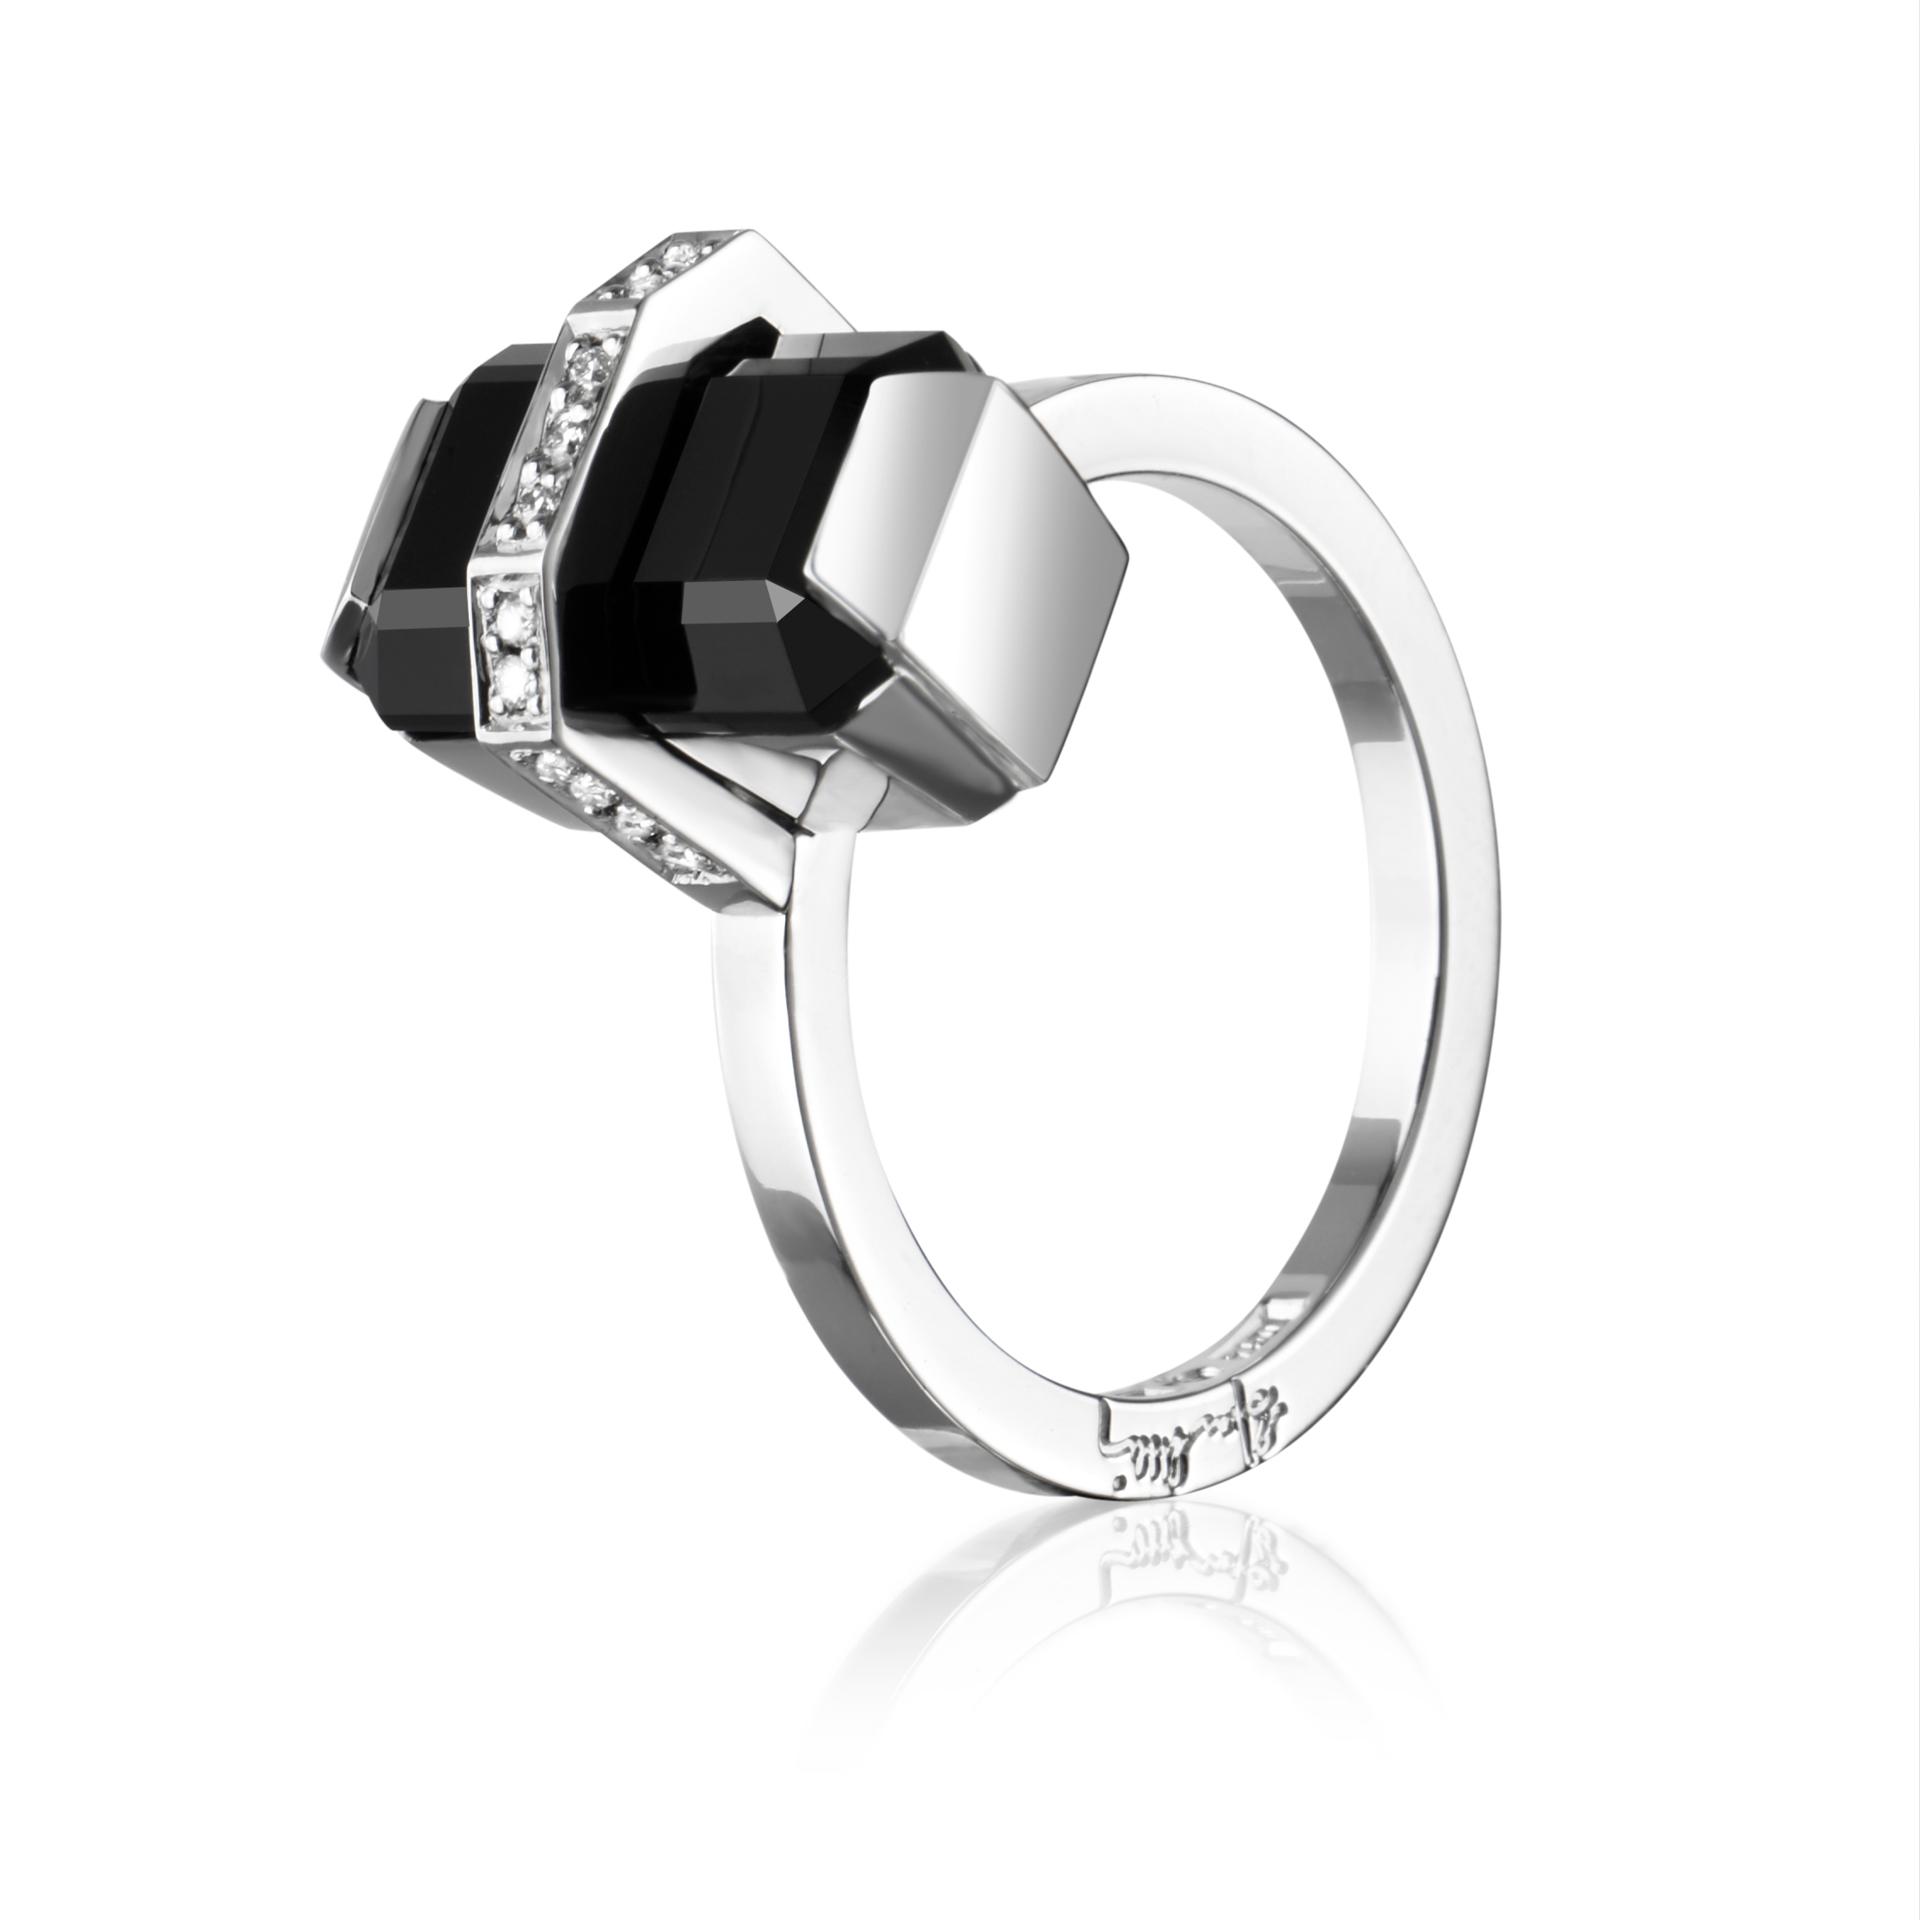 LITTLE BEND OVER RING - ONYX